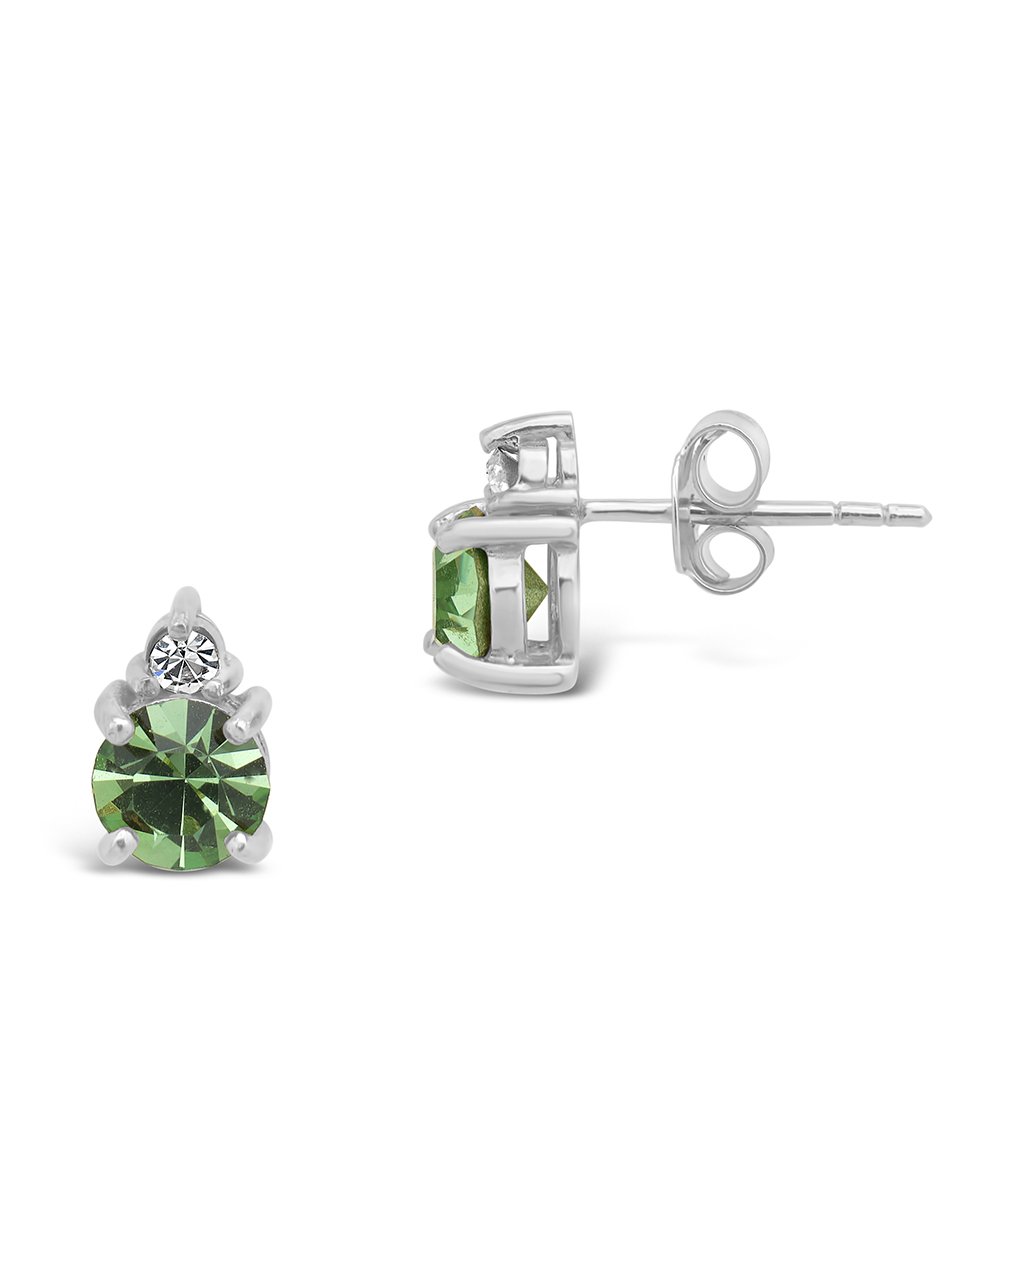 Sterling Silver Birthstone Studs Earring Sterling Forever Silver August / Peridot 